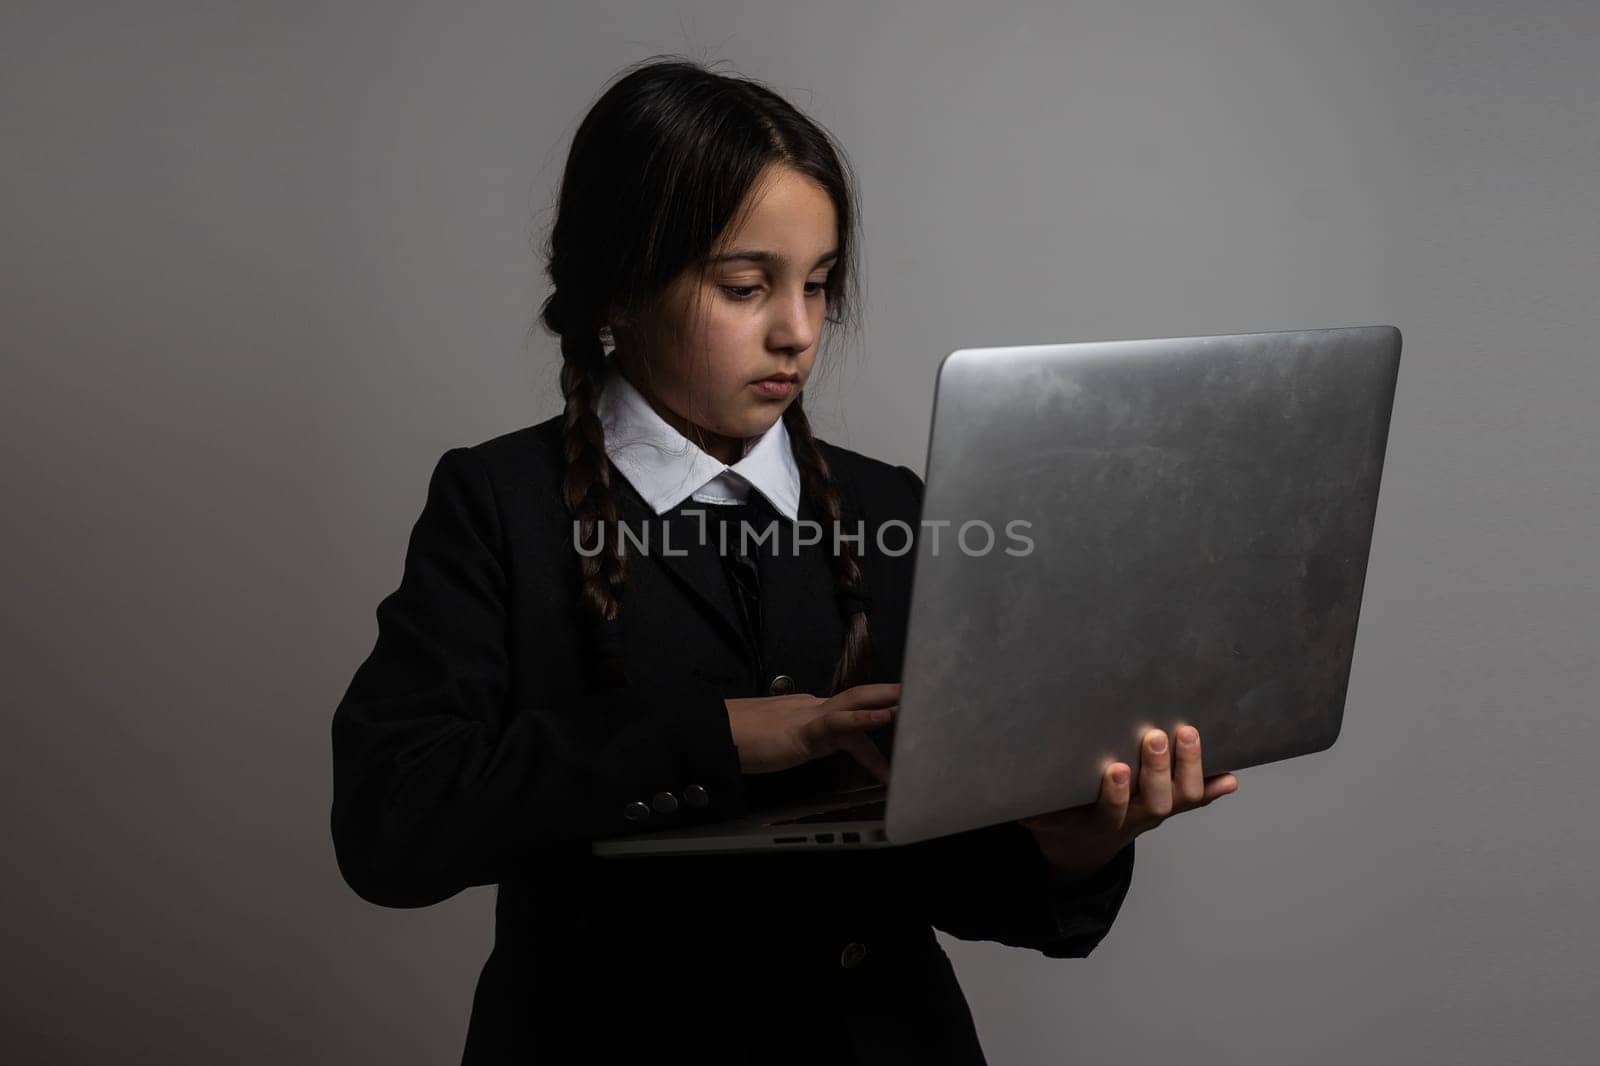 A girl with braids in a gothic style on a dark background with laptop.